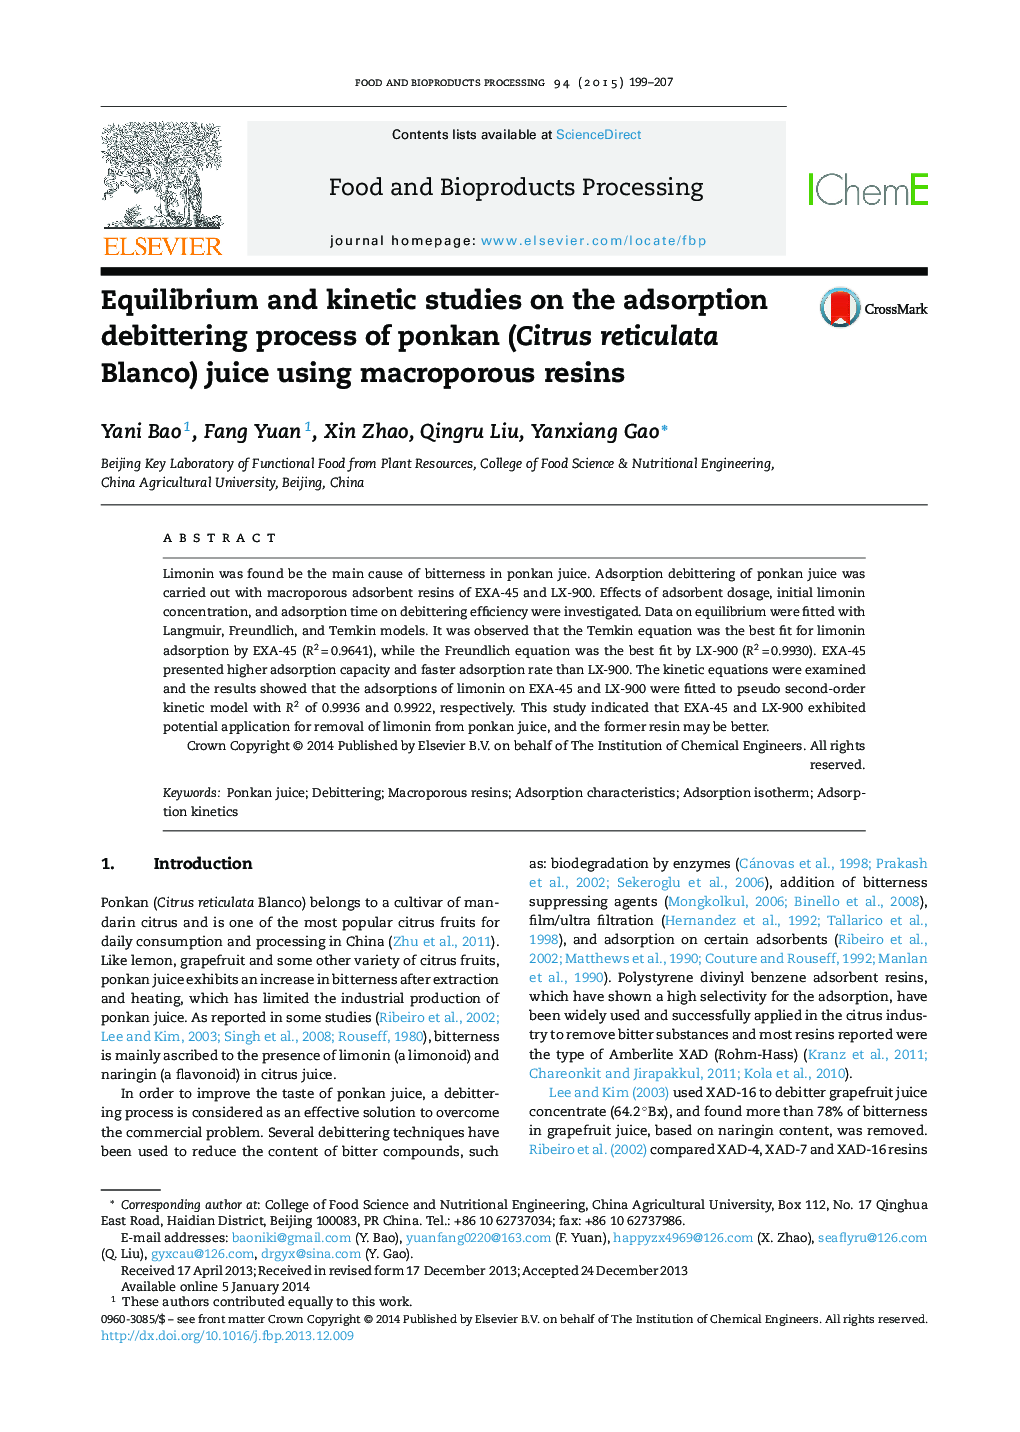 Equilibrium and kinetic studies on the adsorption debittering process of ponkan (Citrus reticulata Blanco) juice using macroporous resins